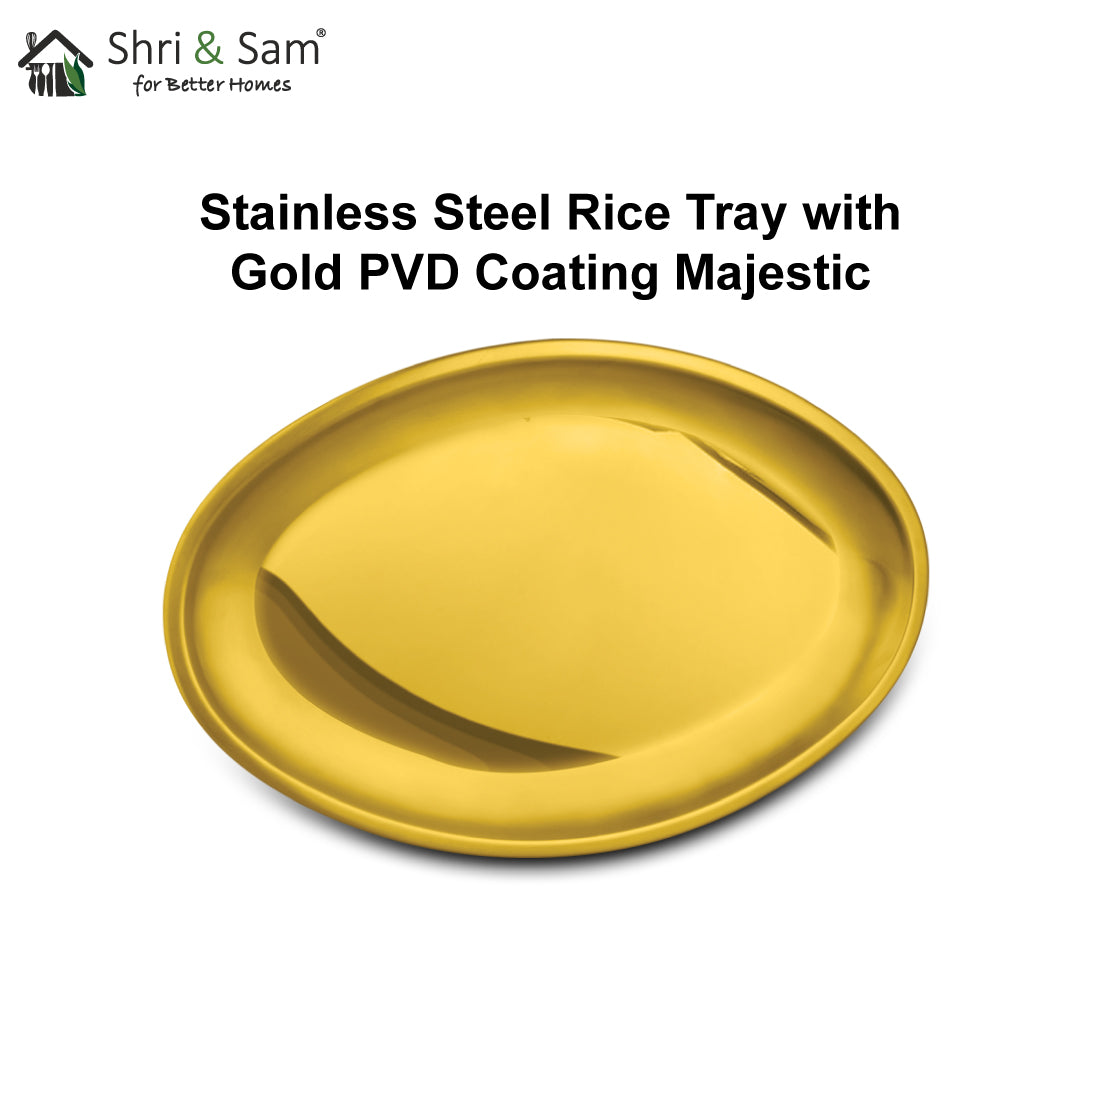 Stainless Steel Rice Tray with Gold PVD Coating Majestic